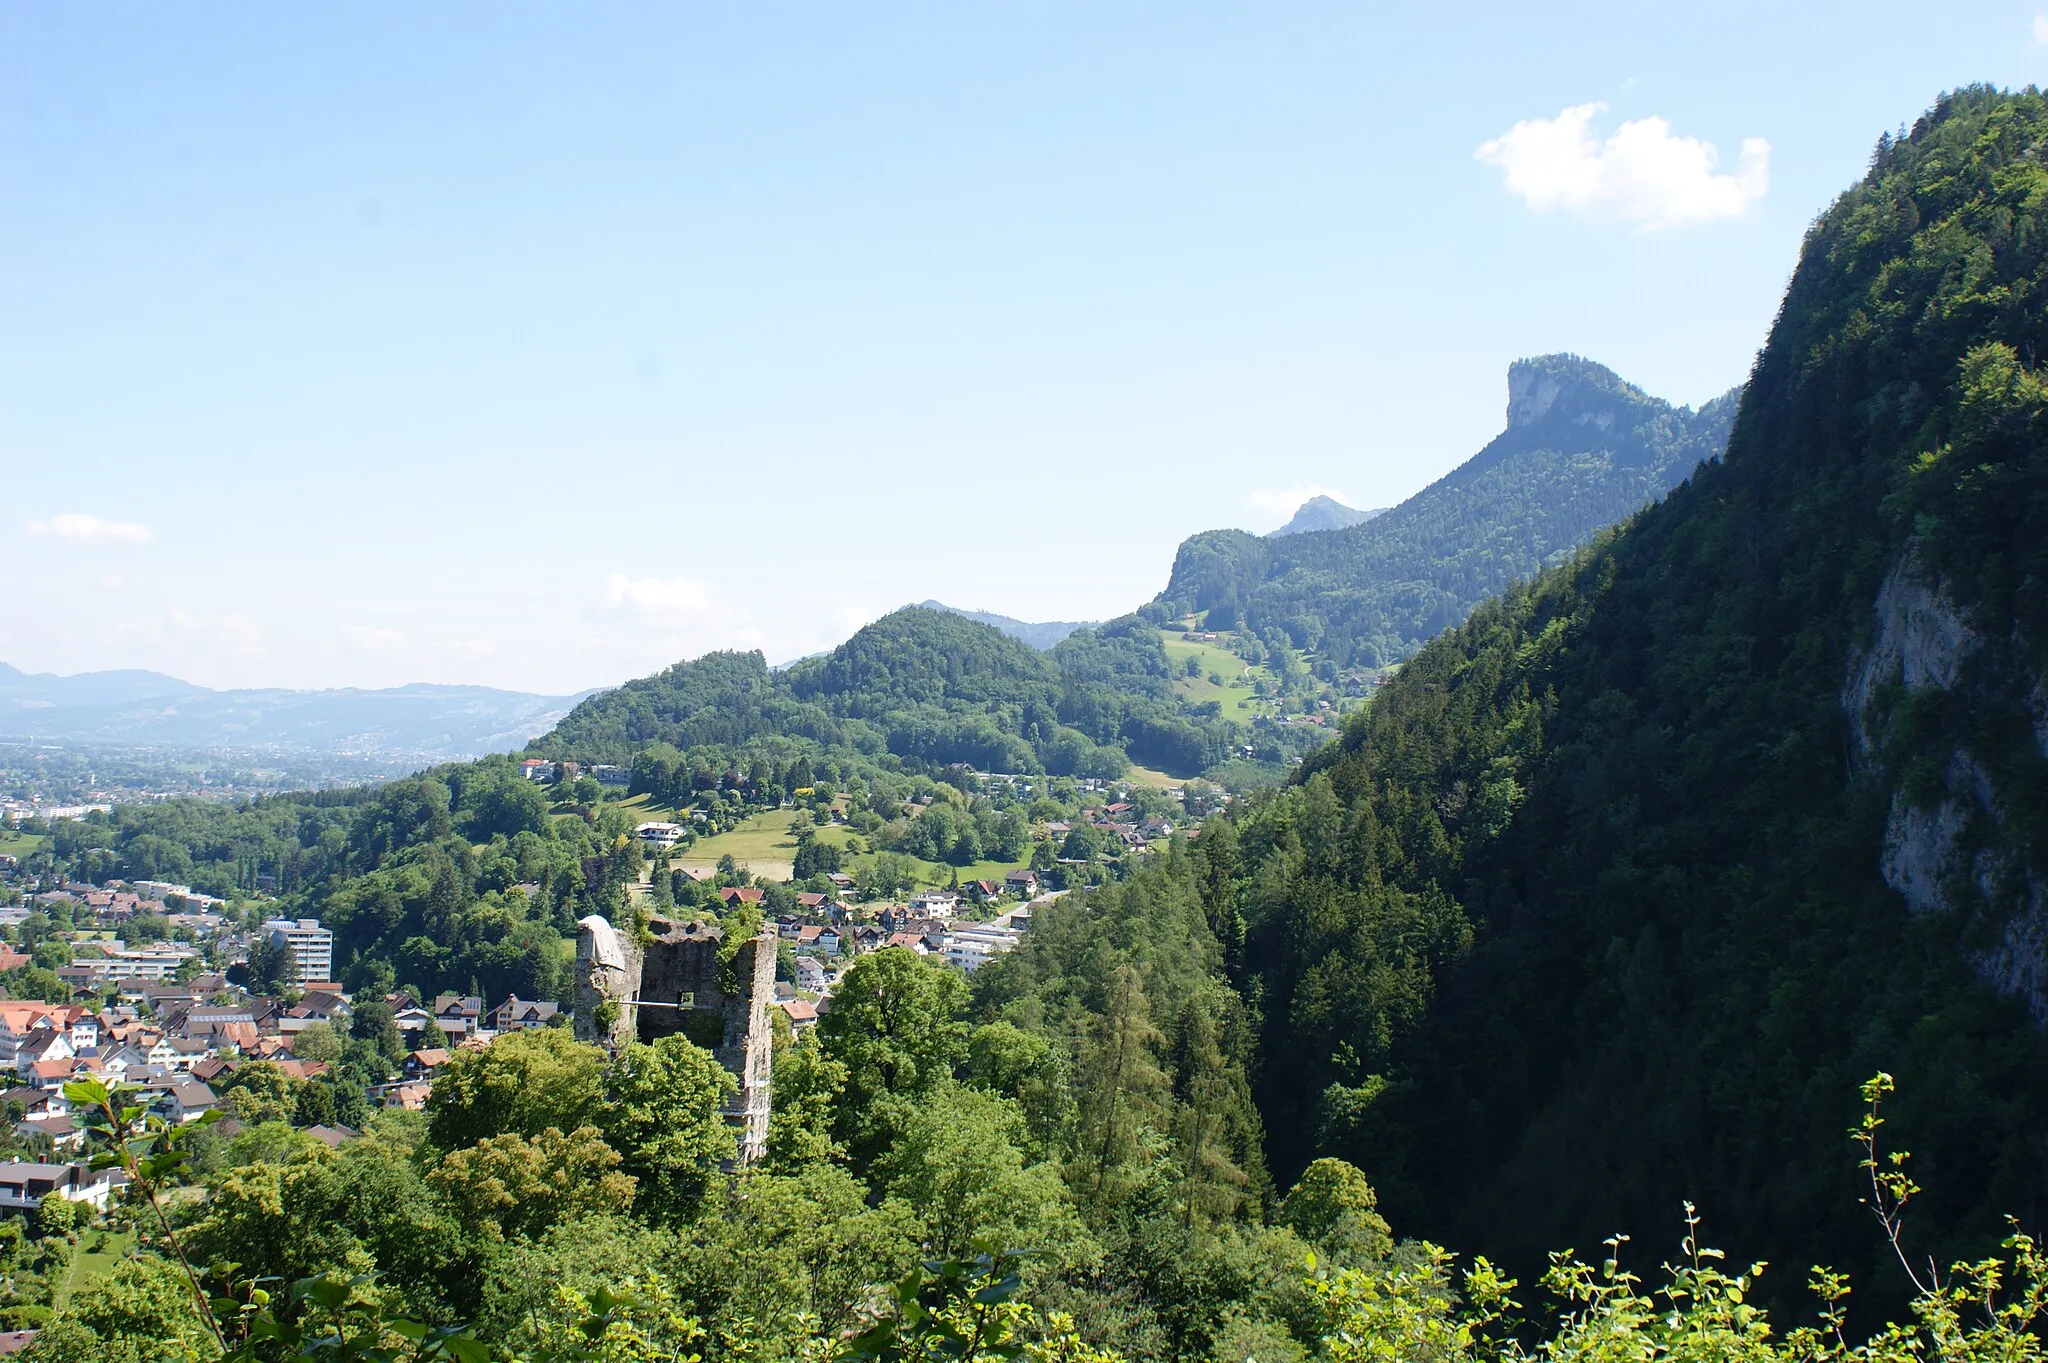 Photo showing: Goetzis, Vorarlberg, Austria. View from Therenberg. On the right behind the "Kapf" (montain) and the district "Berg", on the left Götzis and the lower Alpine Rhine valley with a view towards Lake Constance. In front the Neu-Montfort ruin (castle).